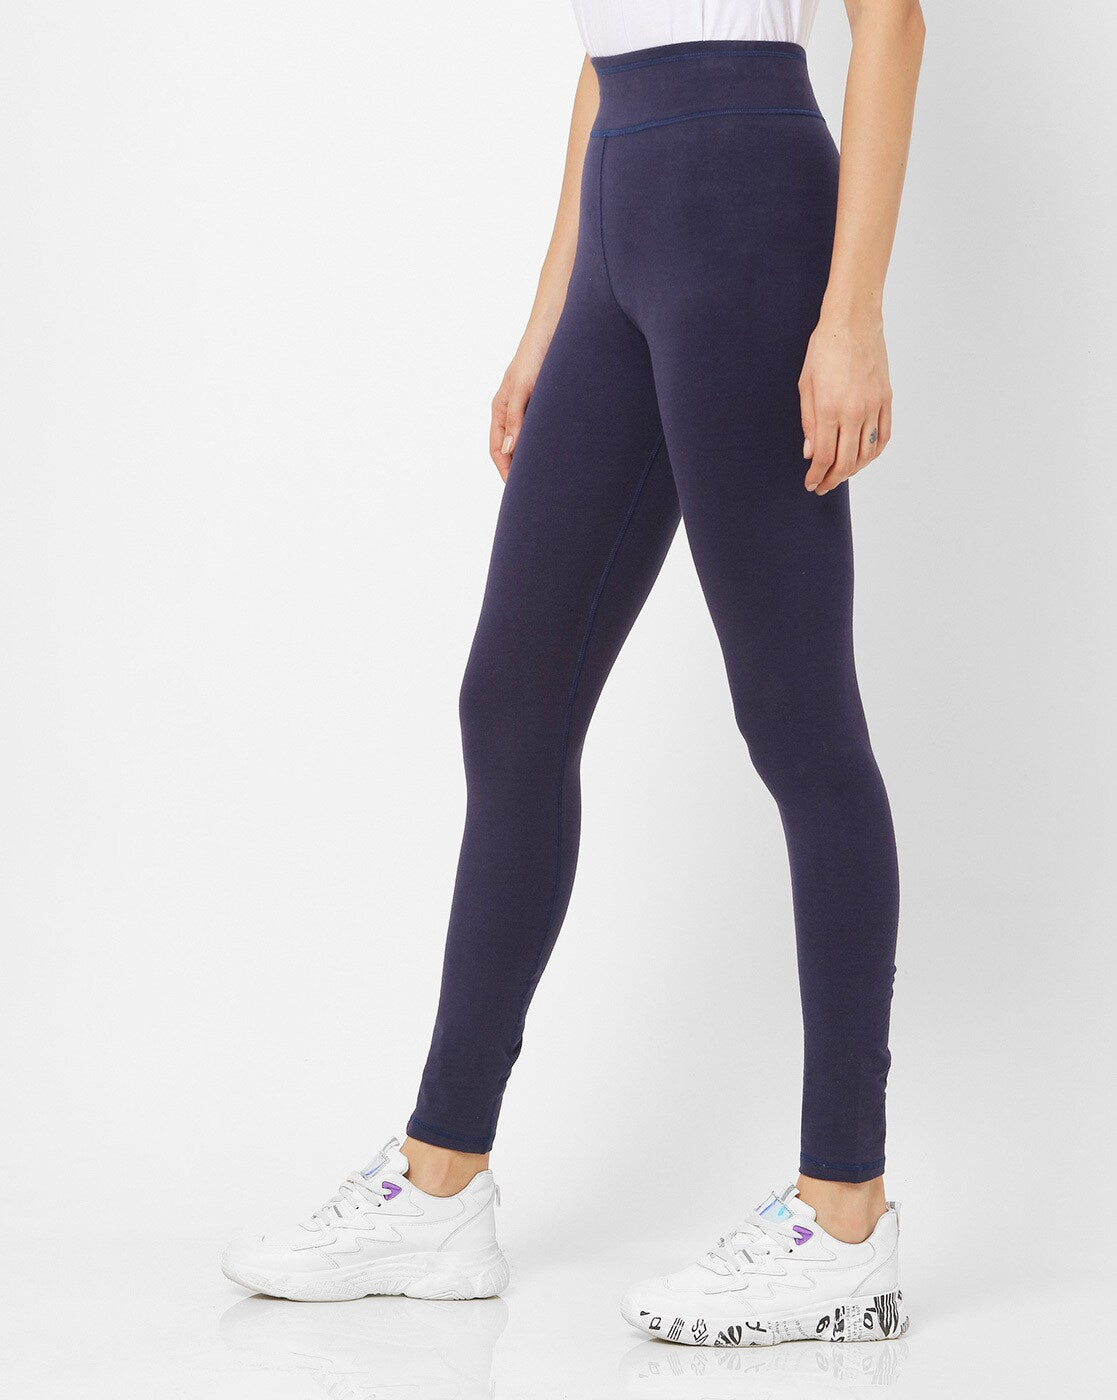 NaturallyActive: Seamless Athletic/Fitness Shaper Long Leggings for Wo –  NATURALLYBABYPH CO.